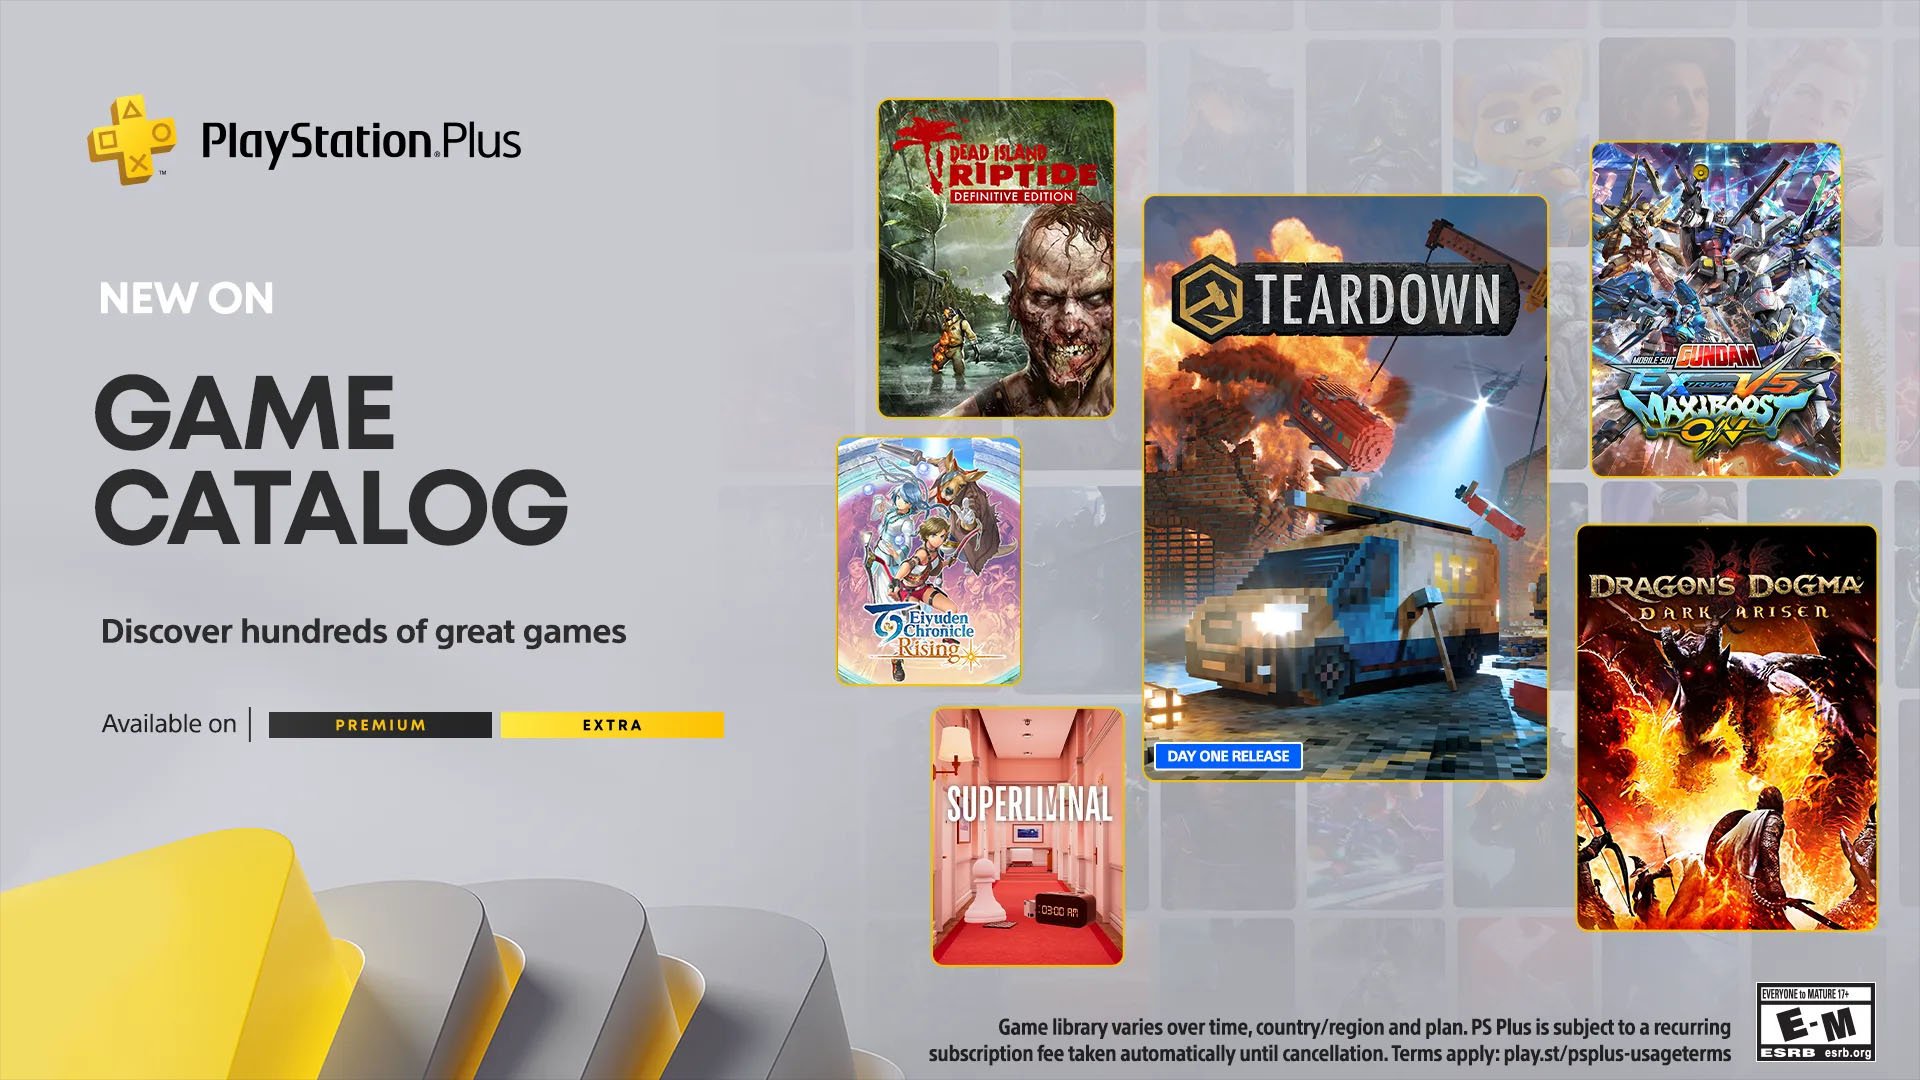 23 Games Join PlayStation Plus' Game Catalog - KeenGamer